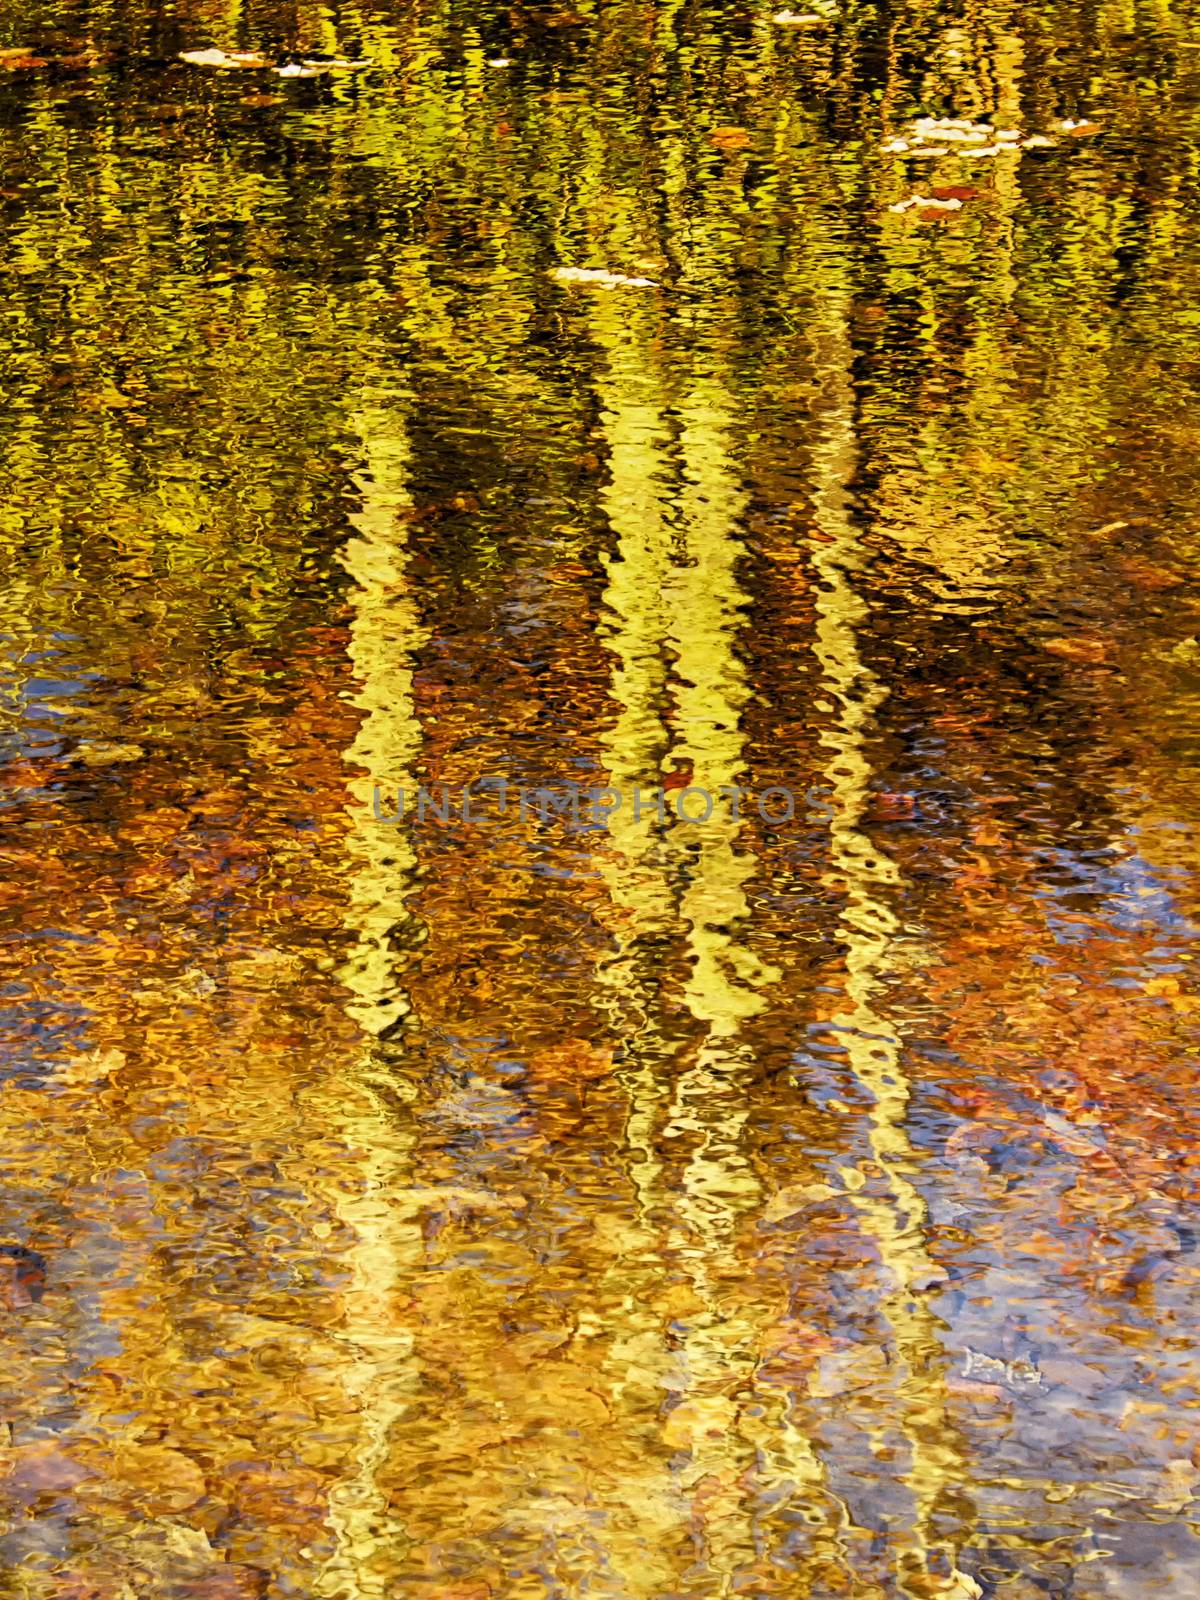 Reflection of Fall Trees by CharlieFloyd